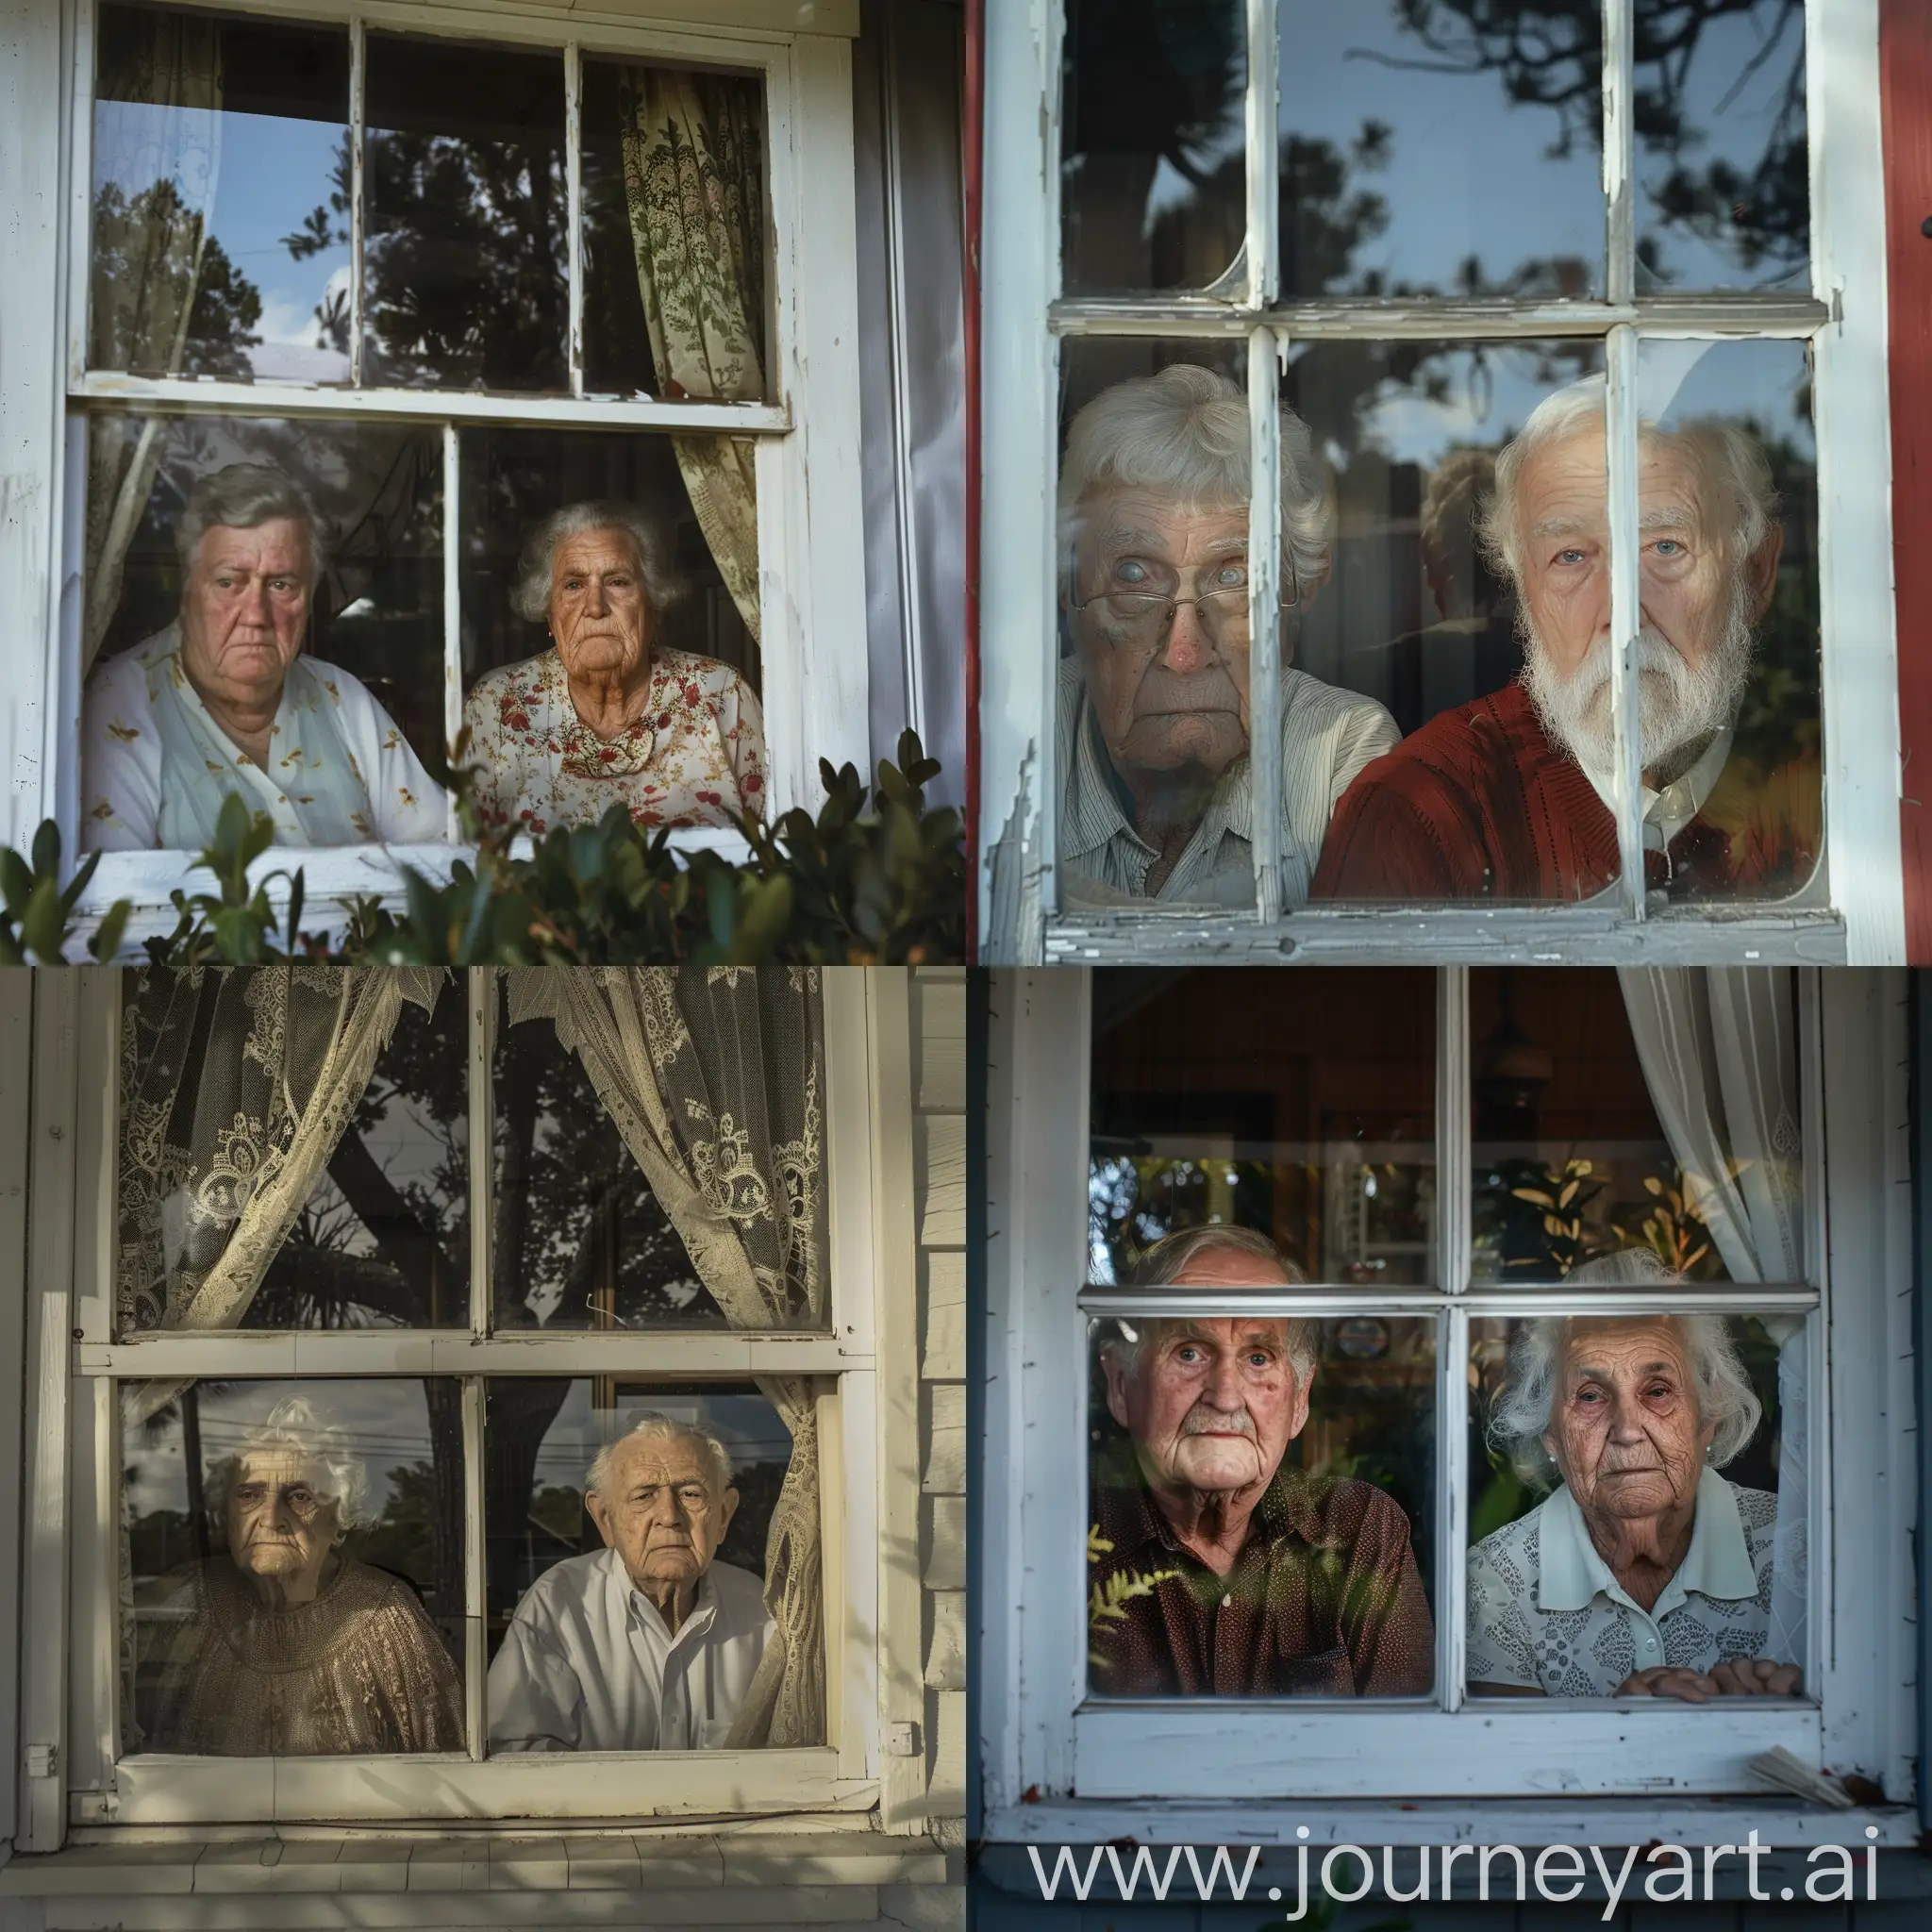 an old white man and an old white woman watching to camera through window of their house, noon, Florida, realistic